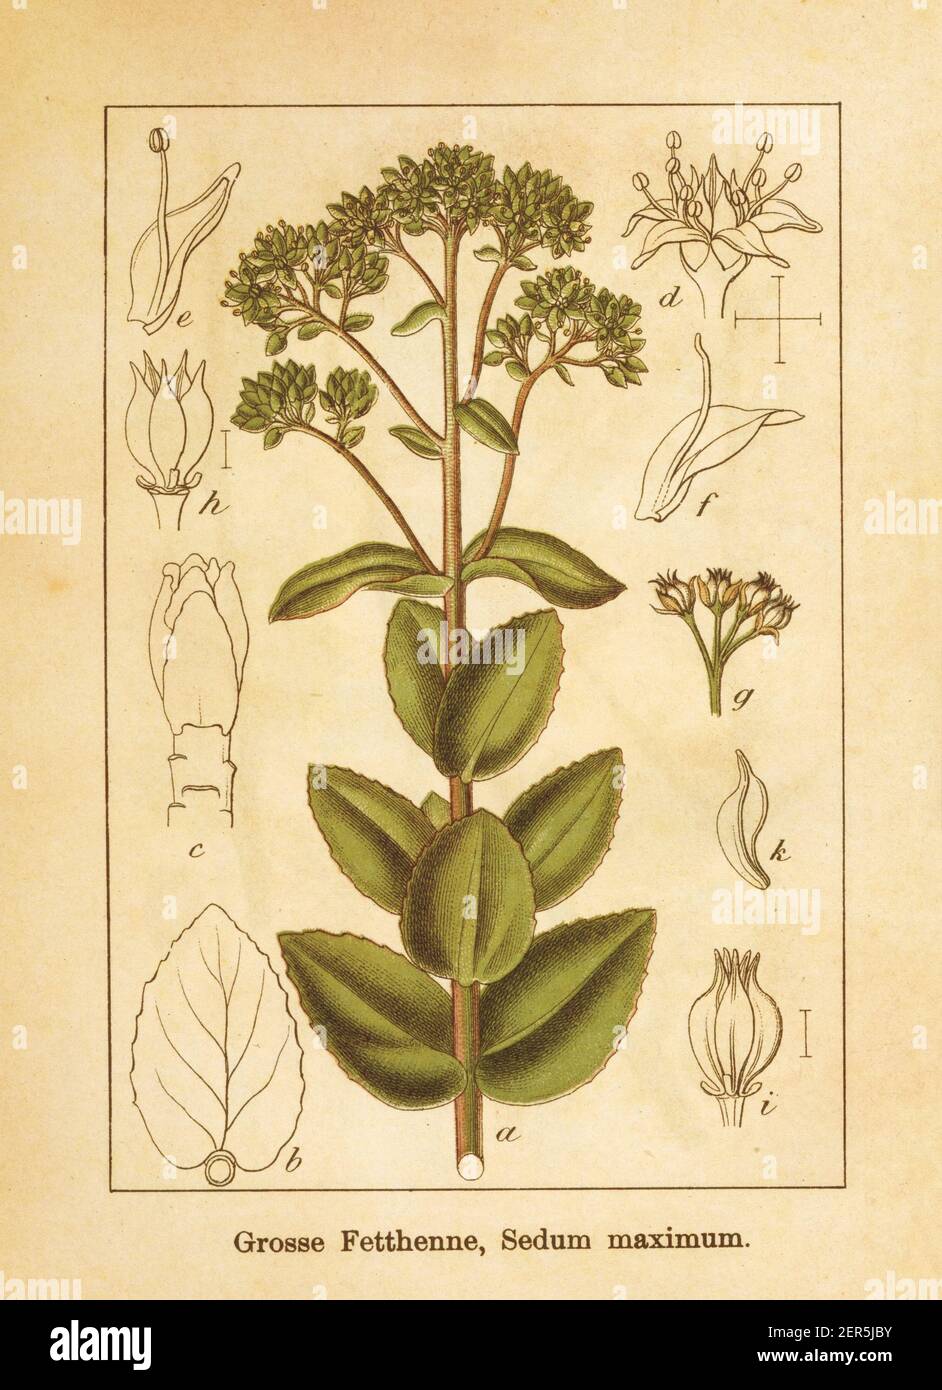 Antique illustration of a sedum maximum, also known as stonecrop. Engraved by Jacob Sturm (1771-1848) and published in the book Deutschlands Flora in Stock Photo